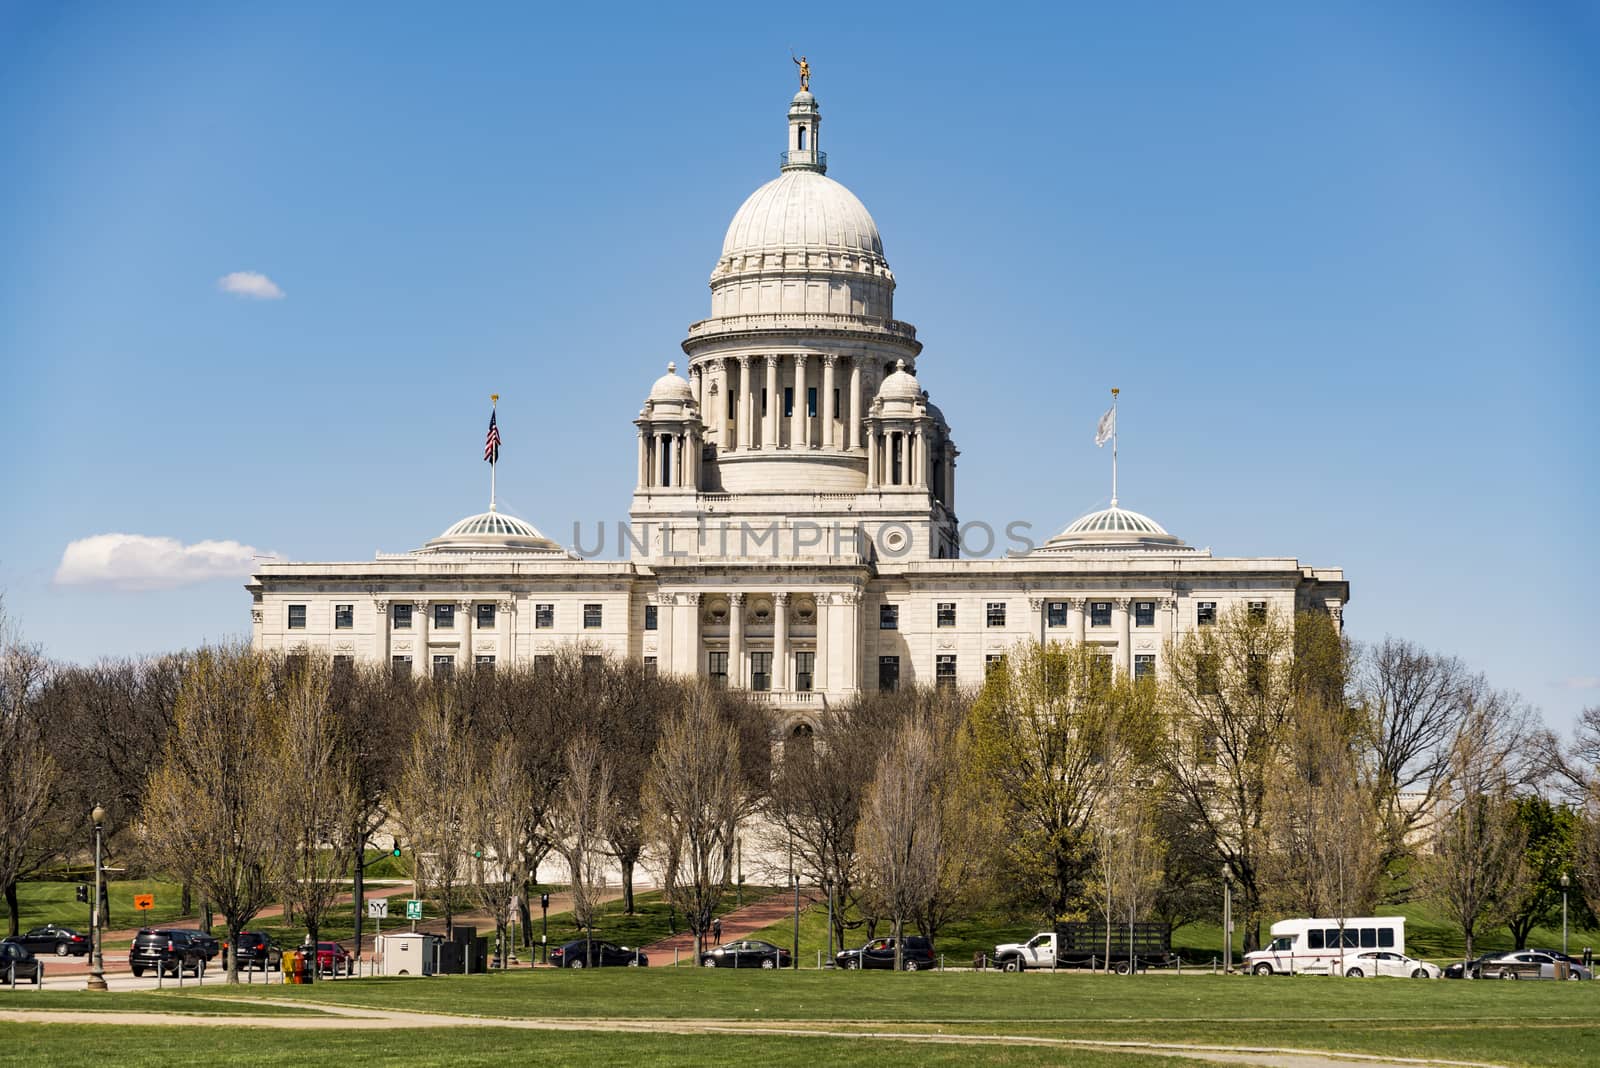 The Rhode Island State House by edella